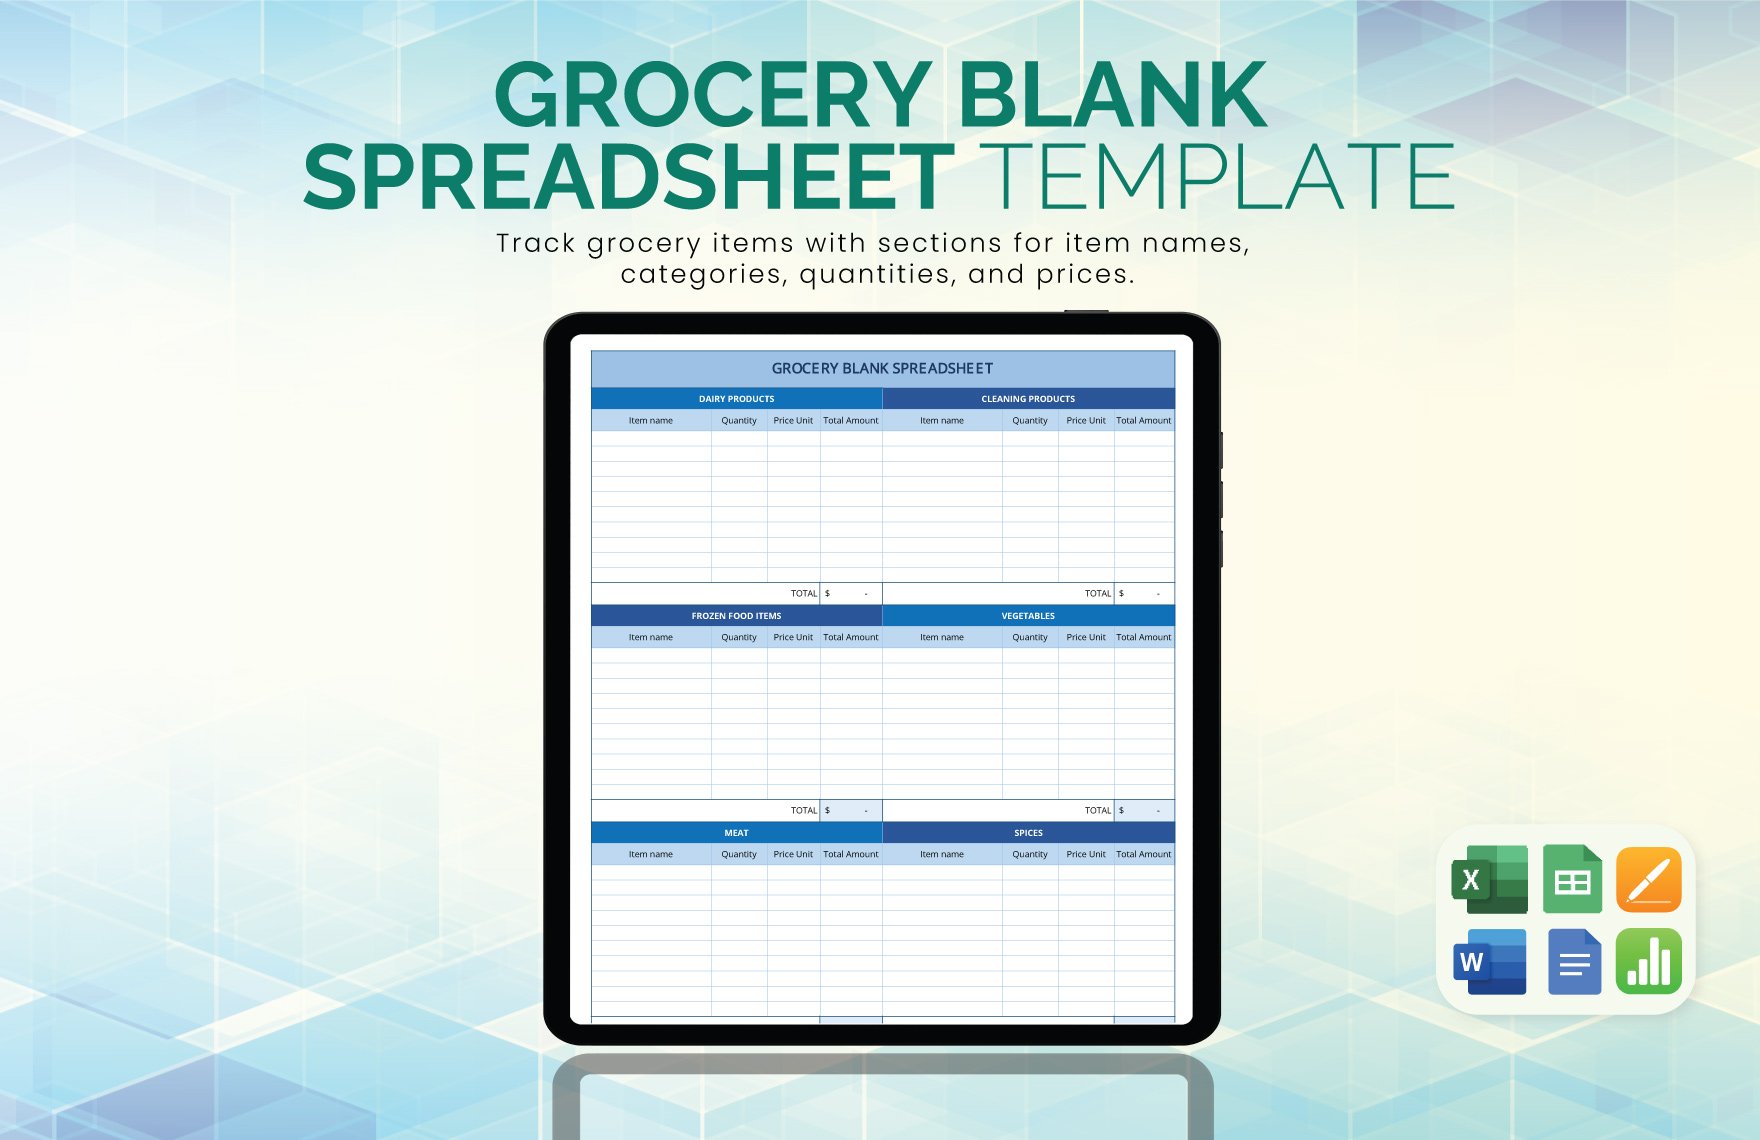 Grocery Blank Spreadsheet Template in Word, Google Docs, Excel, Google Sheets, Apple Pages, Apple Numbers